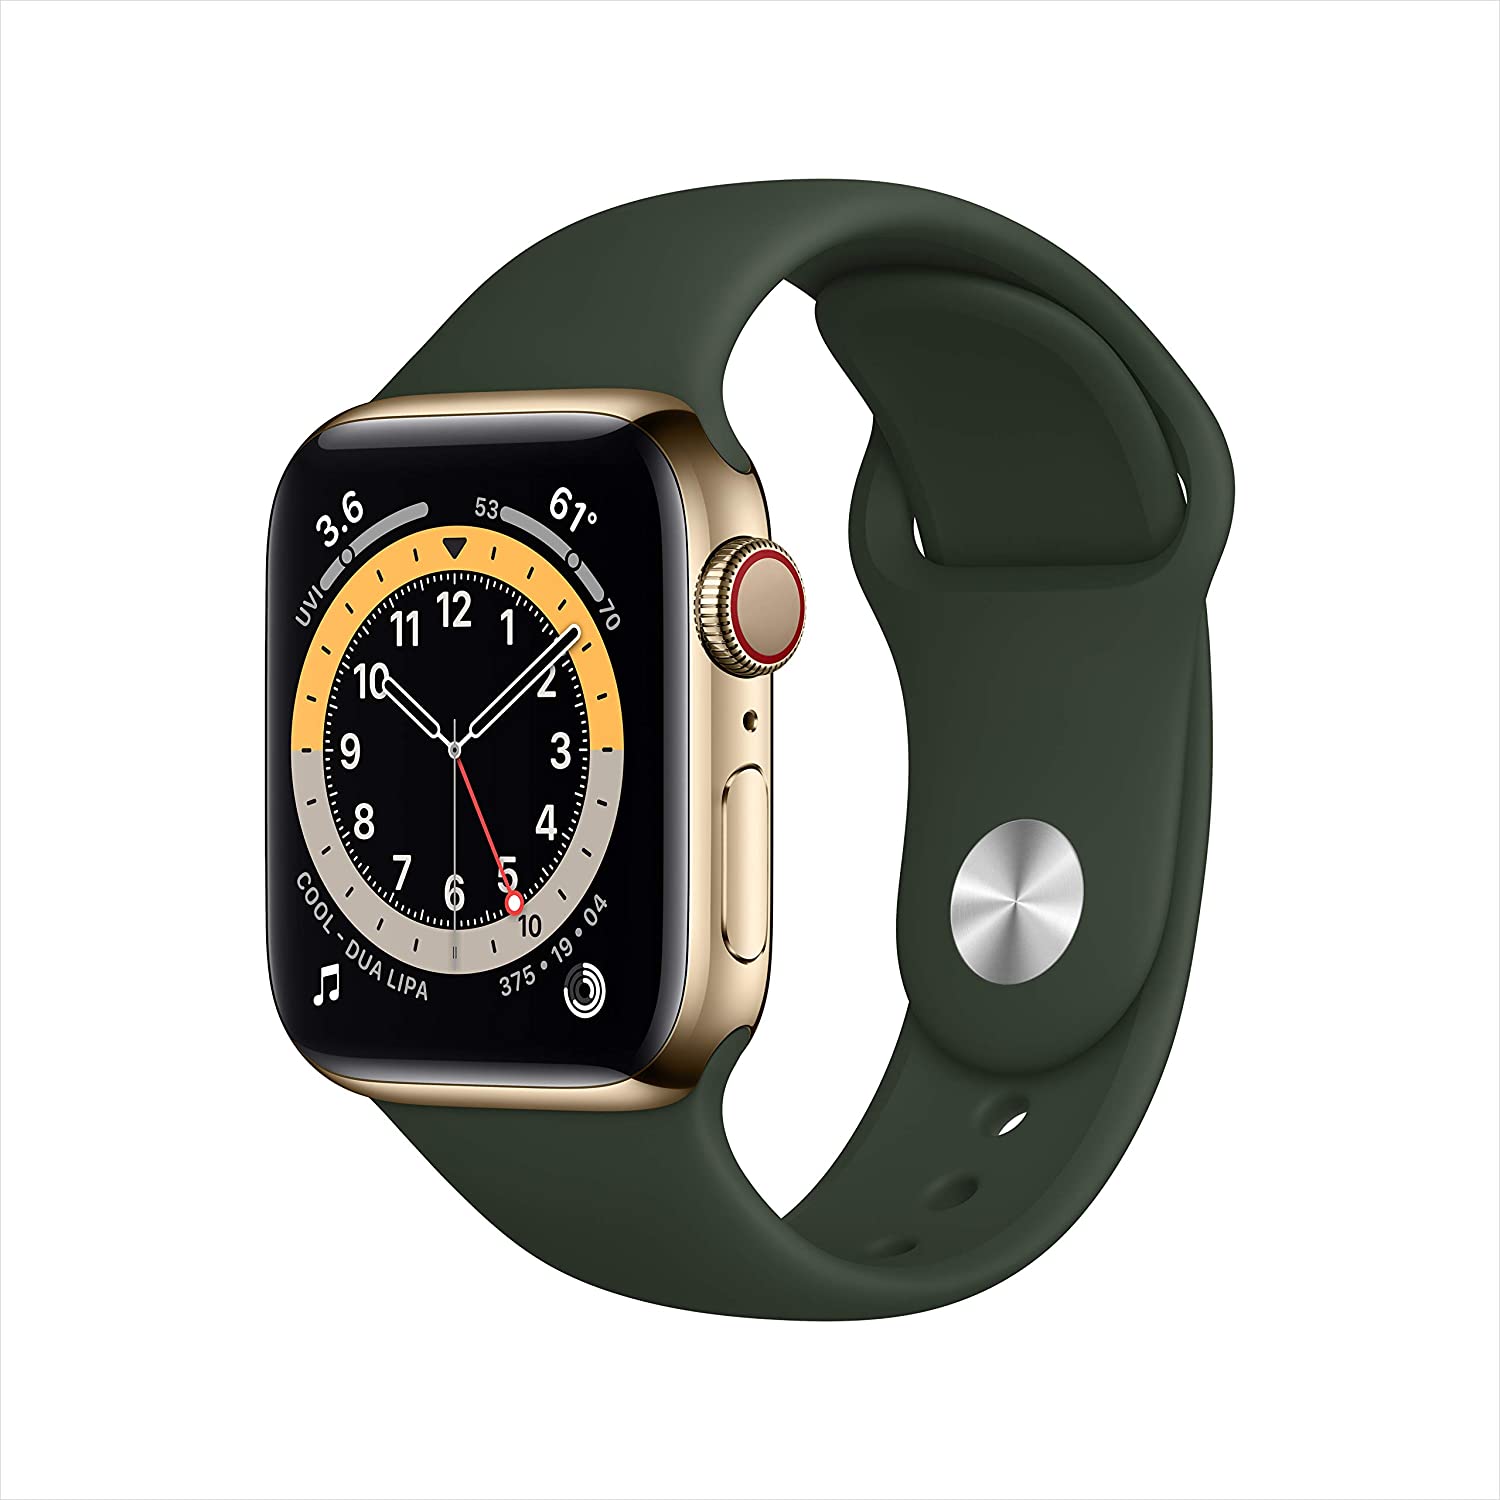 Apple Watch Series 6 (40mm) (Cellular) Specifications